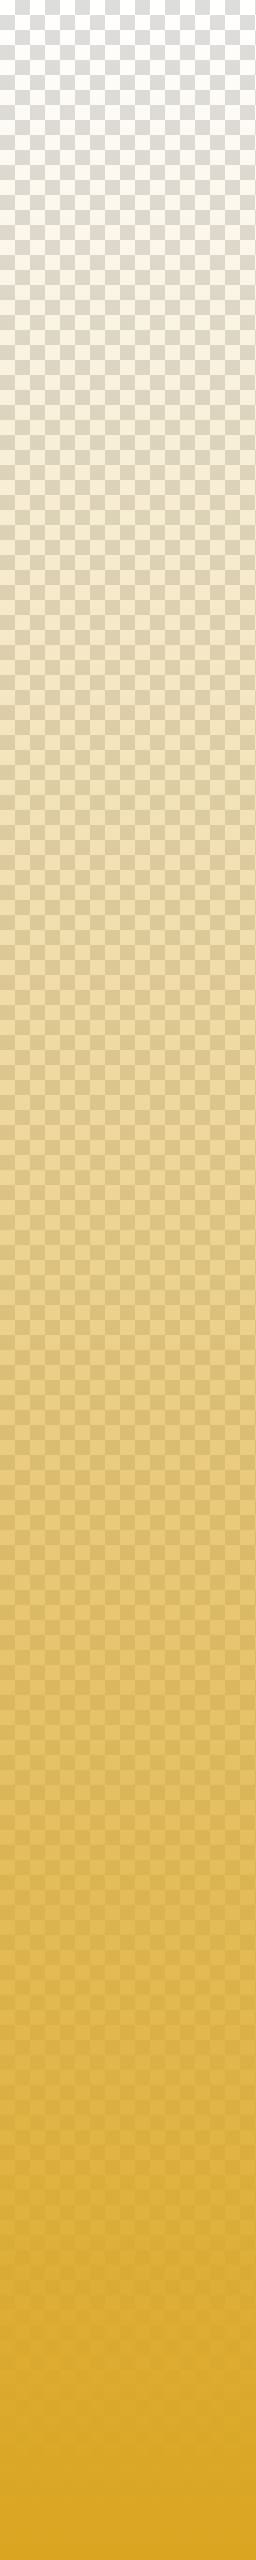 Yellow Angle Pattern, Goldenrod transparent background PNG clipart